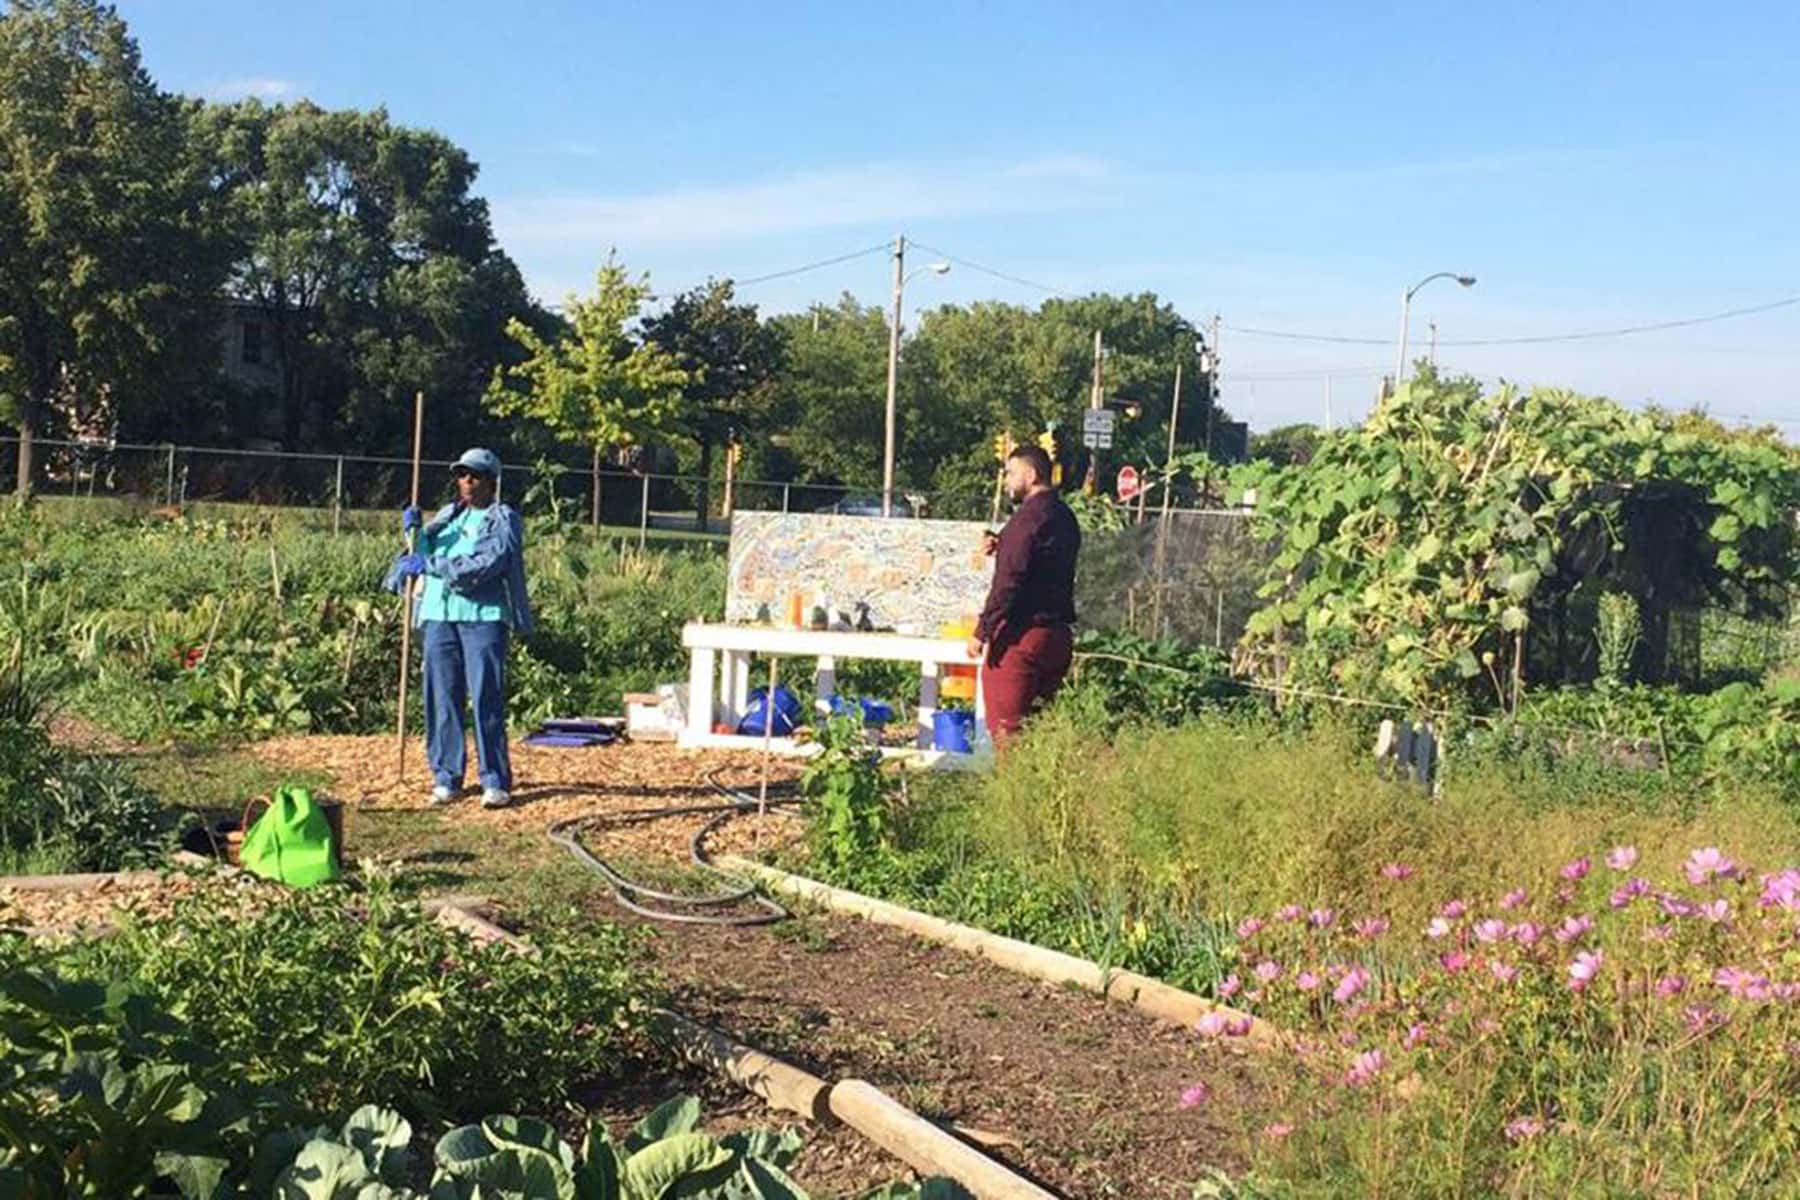 Alice's Garden: A Place of Healing in Milwaukee